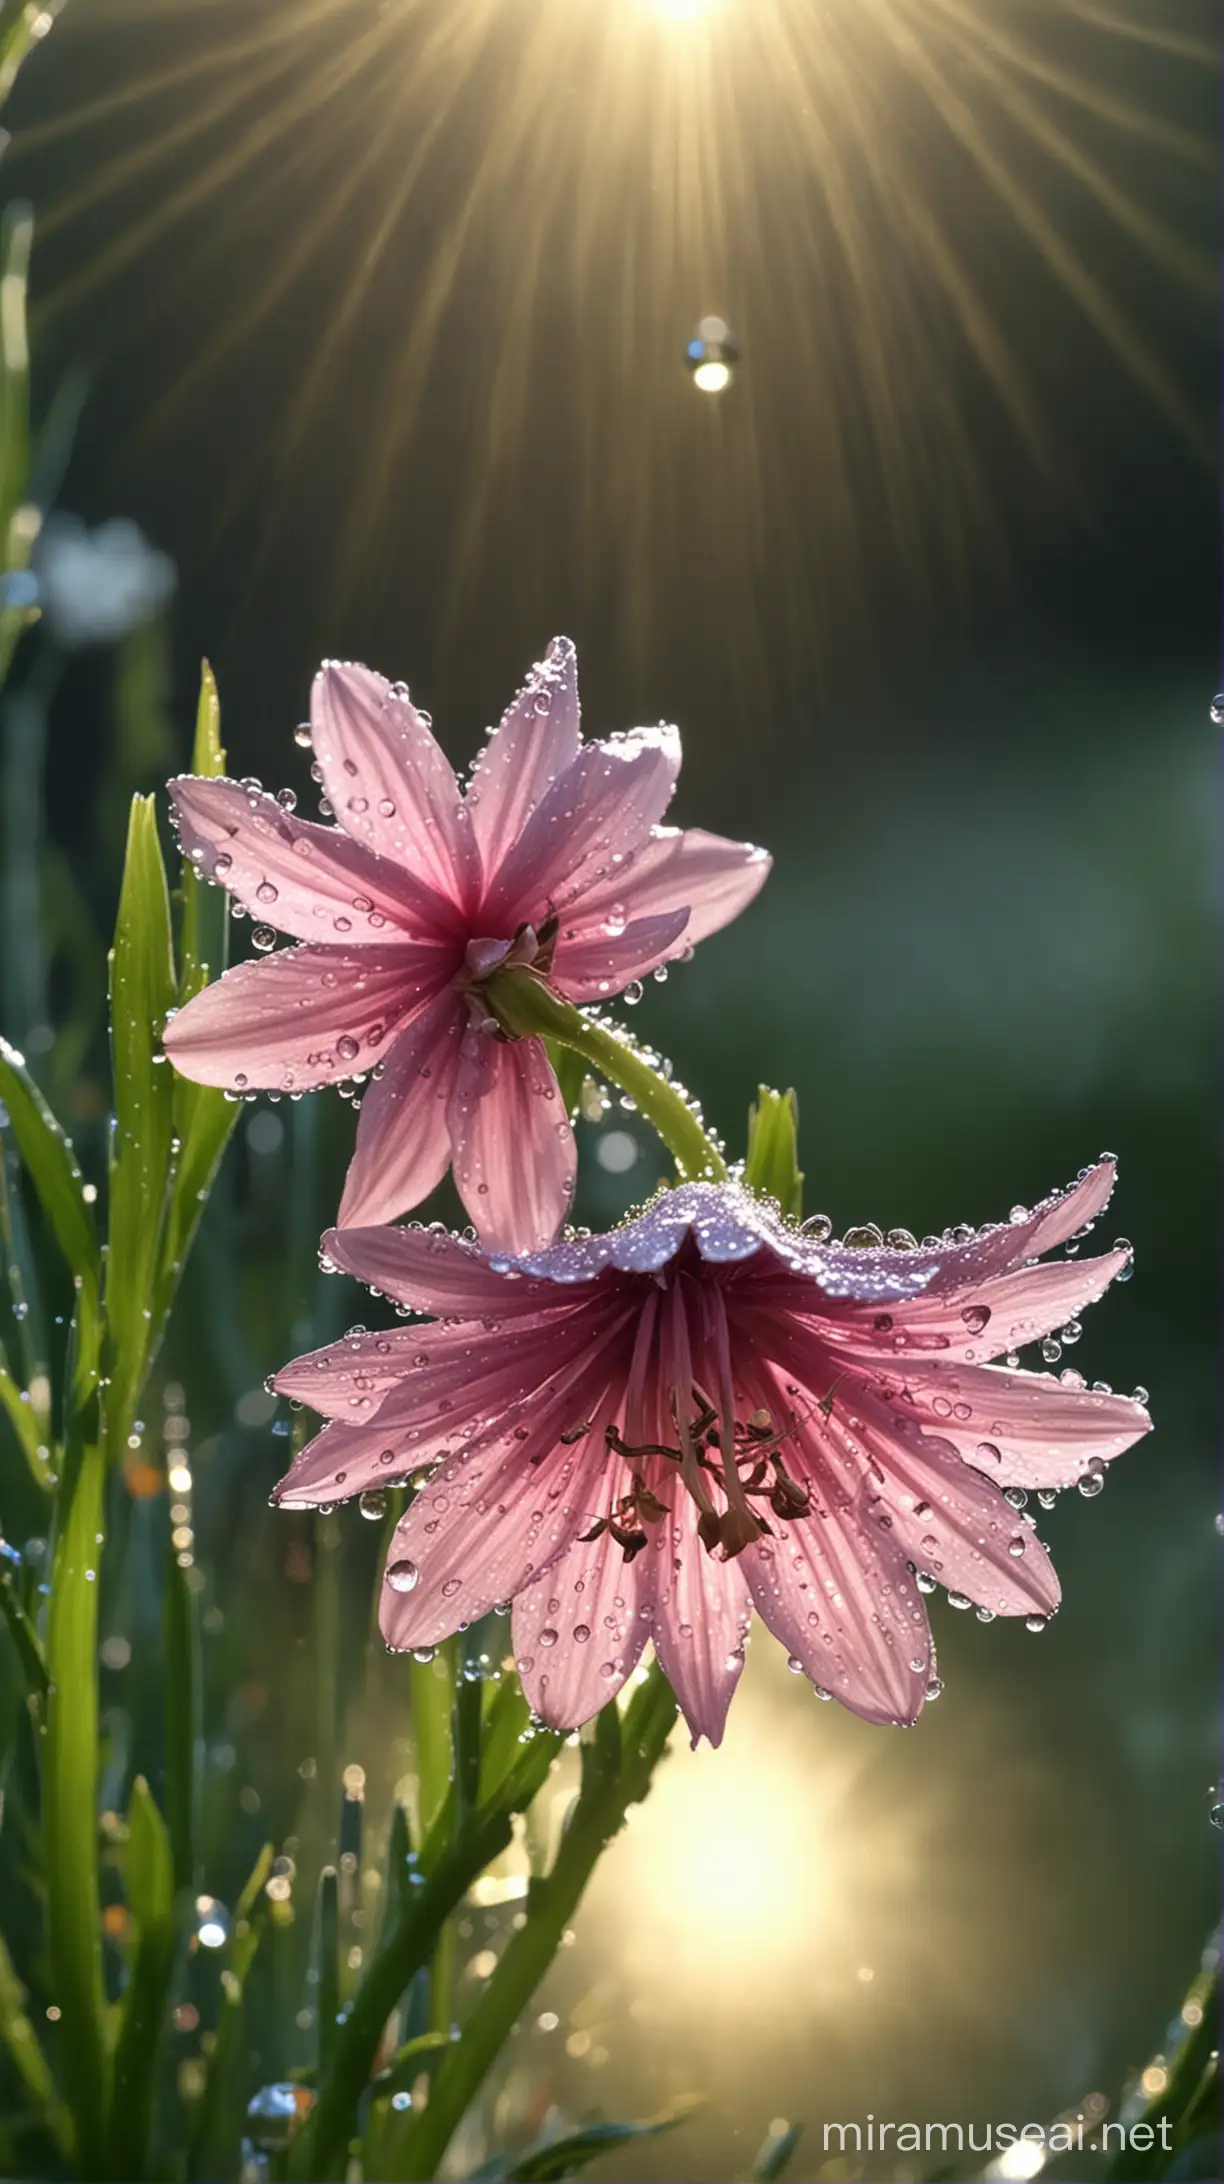 Create an image of beautiful flower plan falling dew drops from it and shinning dew drops die to sun rays